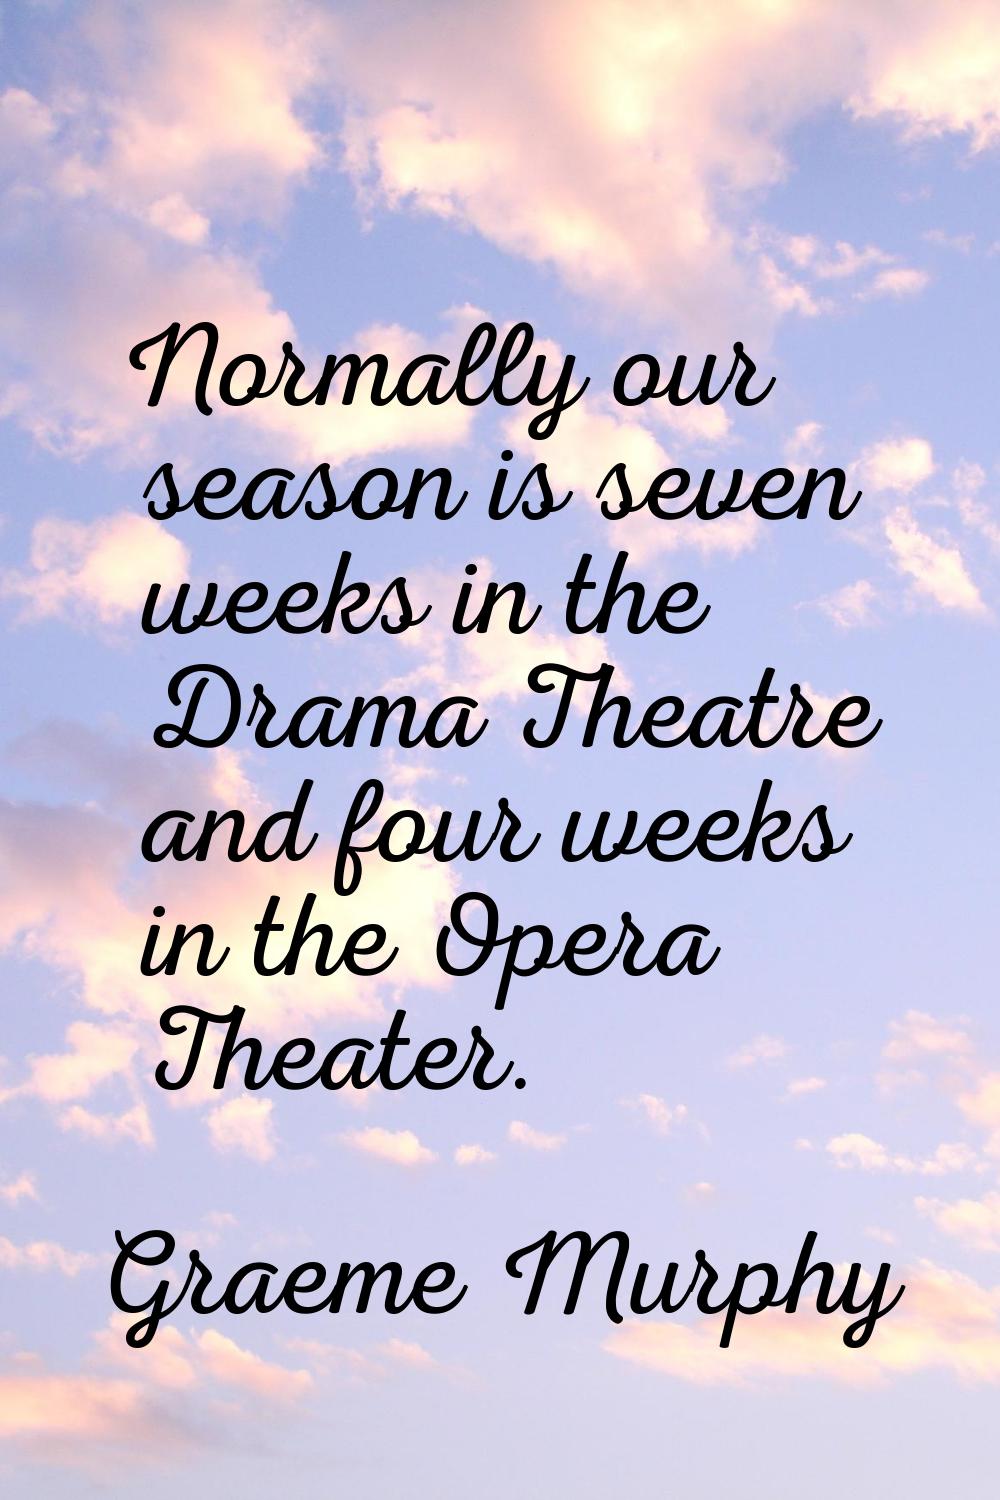 Normally our season is seven weeks in the Drama Theatre and four weeks in the Opera Theater.